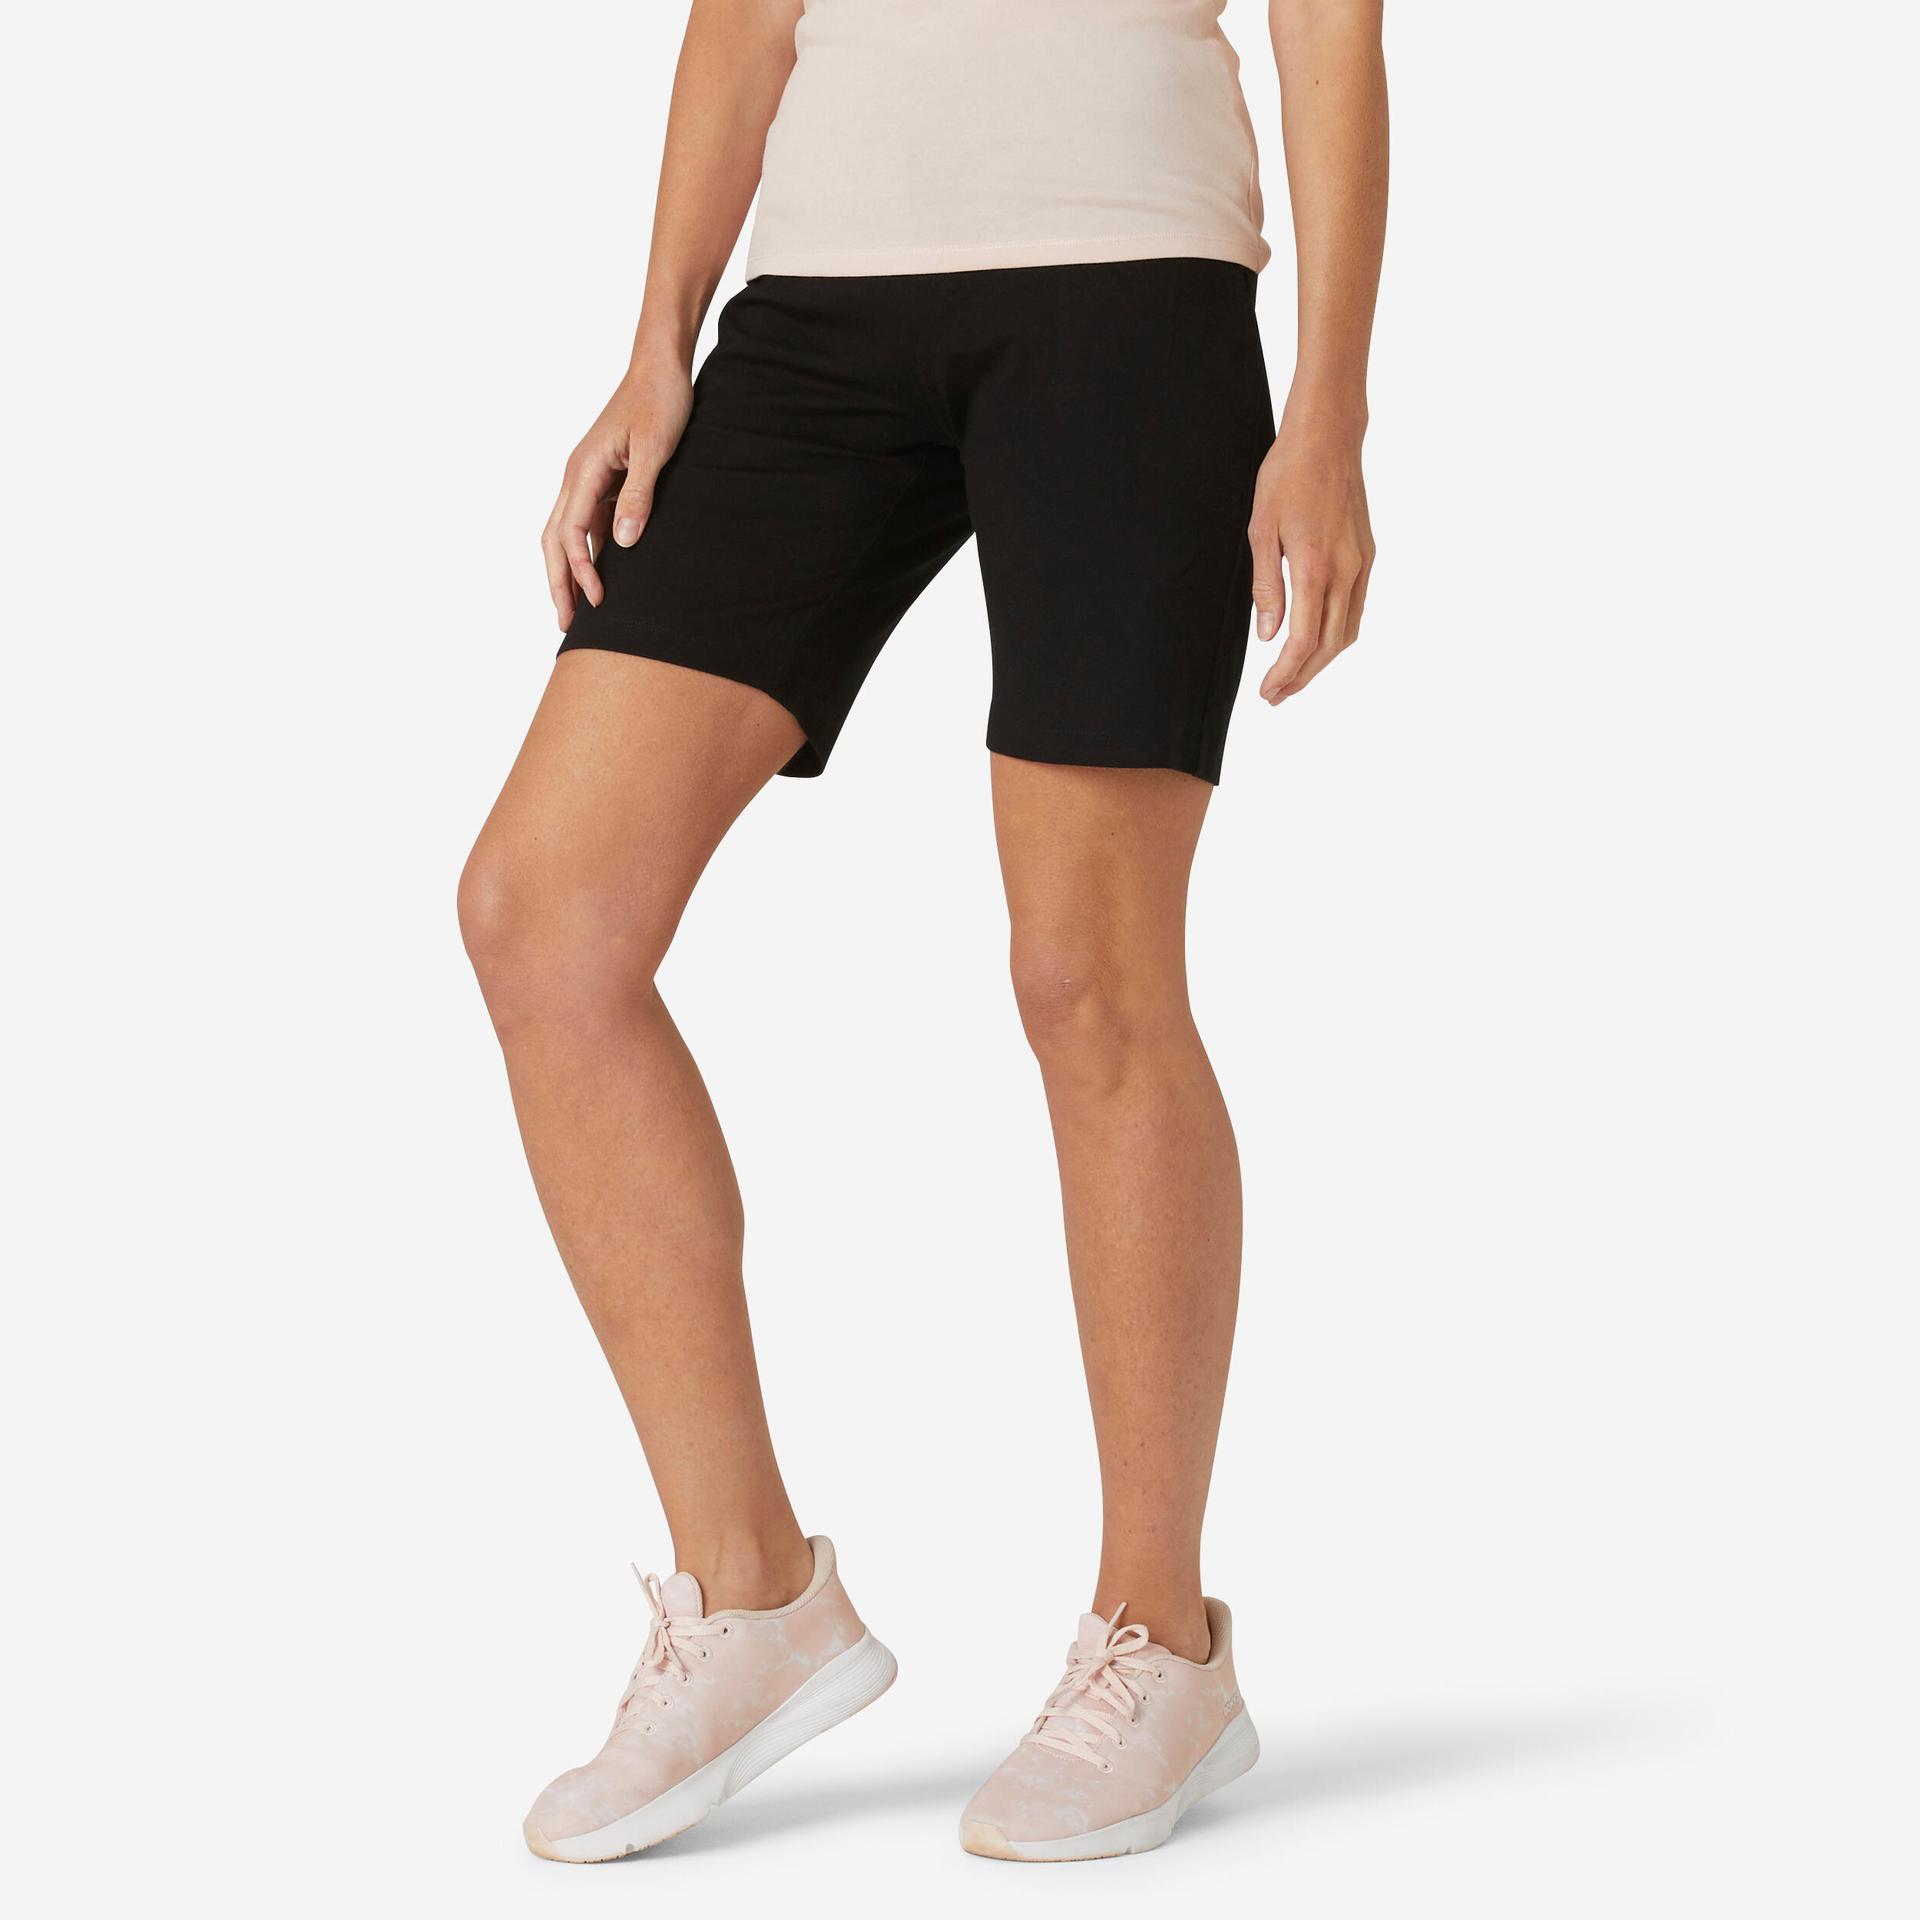 women's-straight-leg-cotton-fitness-shorts-fit+-with-pocket---black